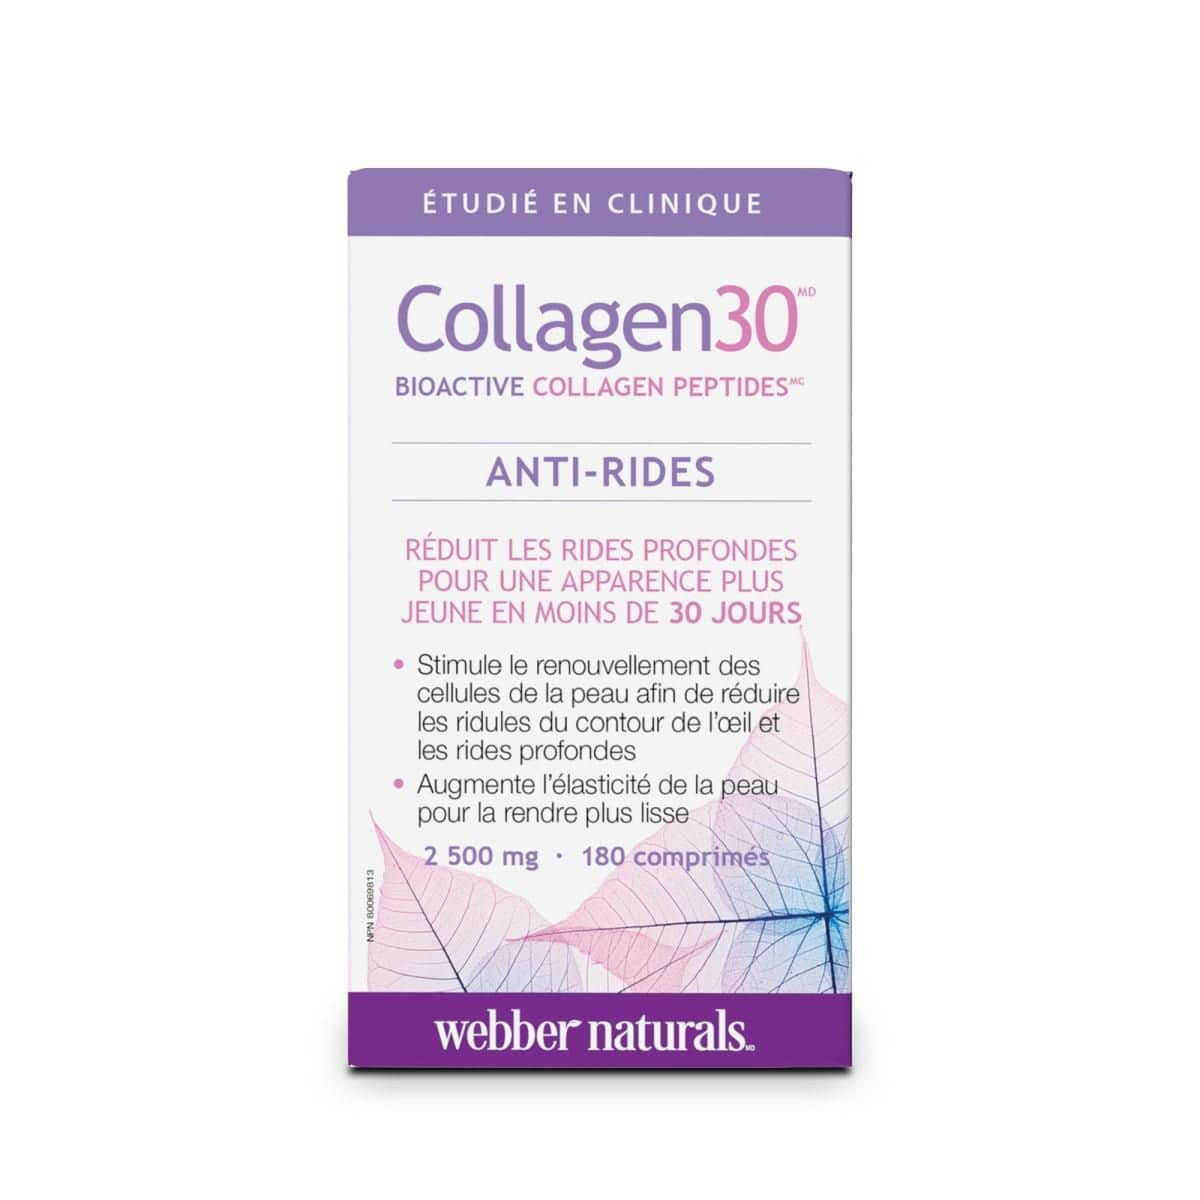 Product label for webber naturals Collagen 30 Bioactive Peptide 2500 mg (180 tablets) in French